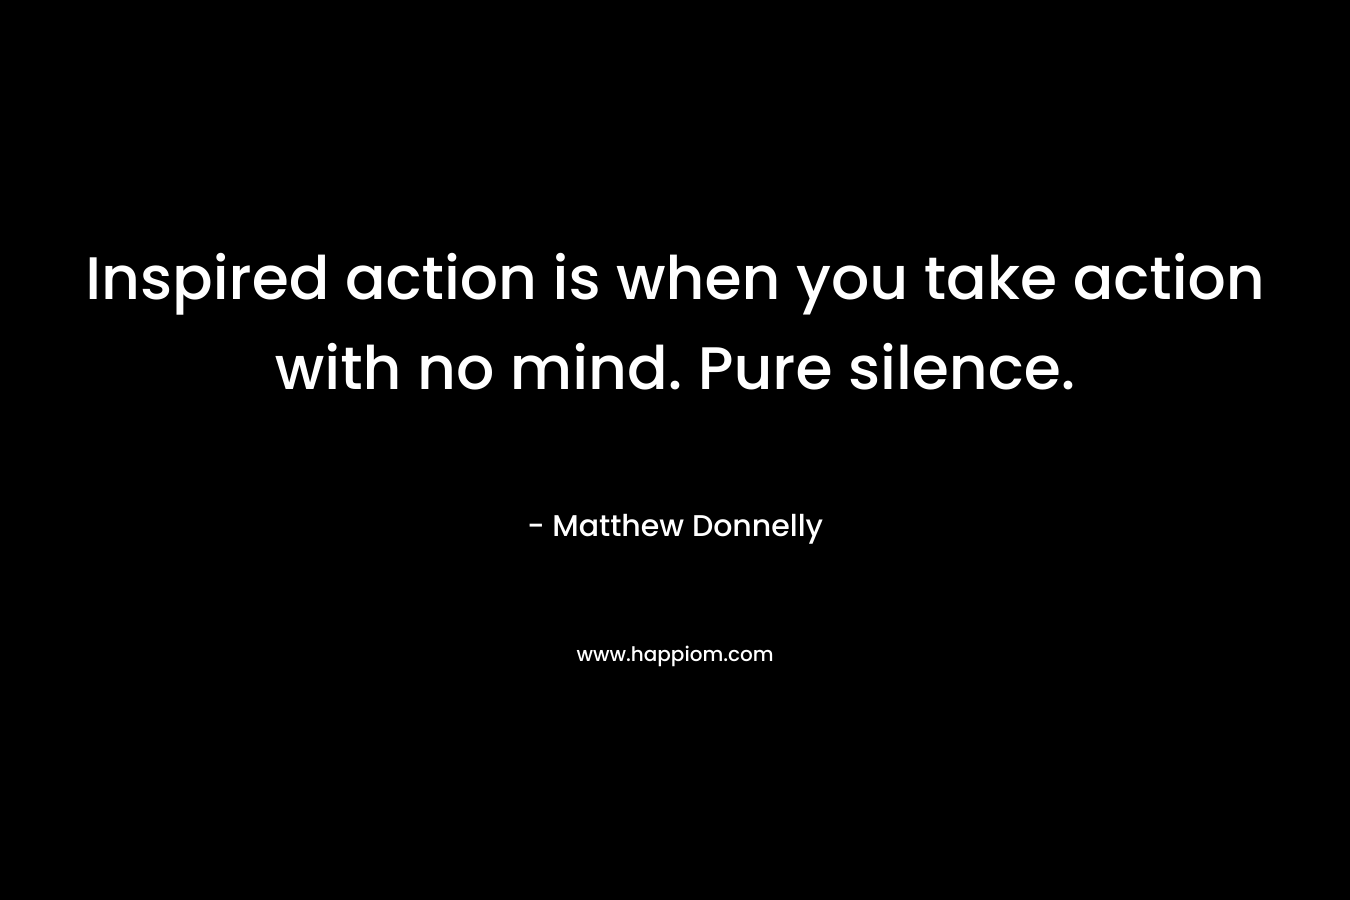 Inspired action is when you take action with no mind. Pure silence. – Matthew Donnelly